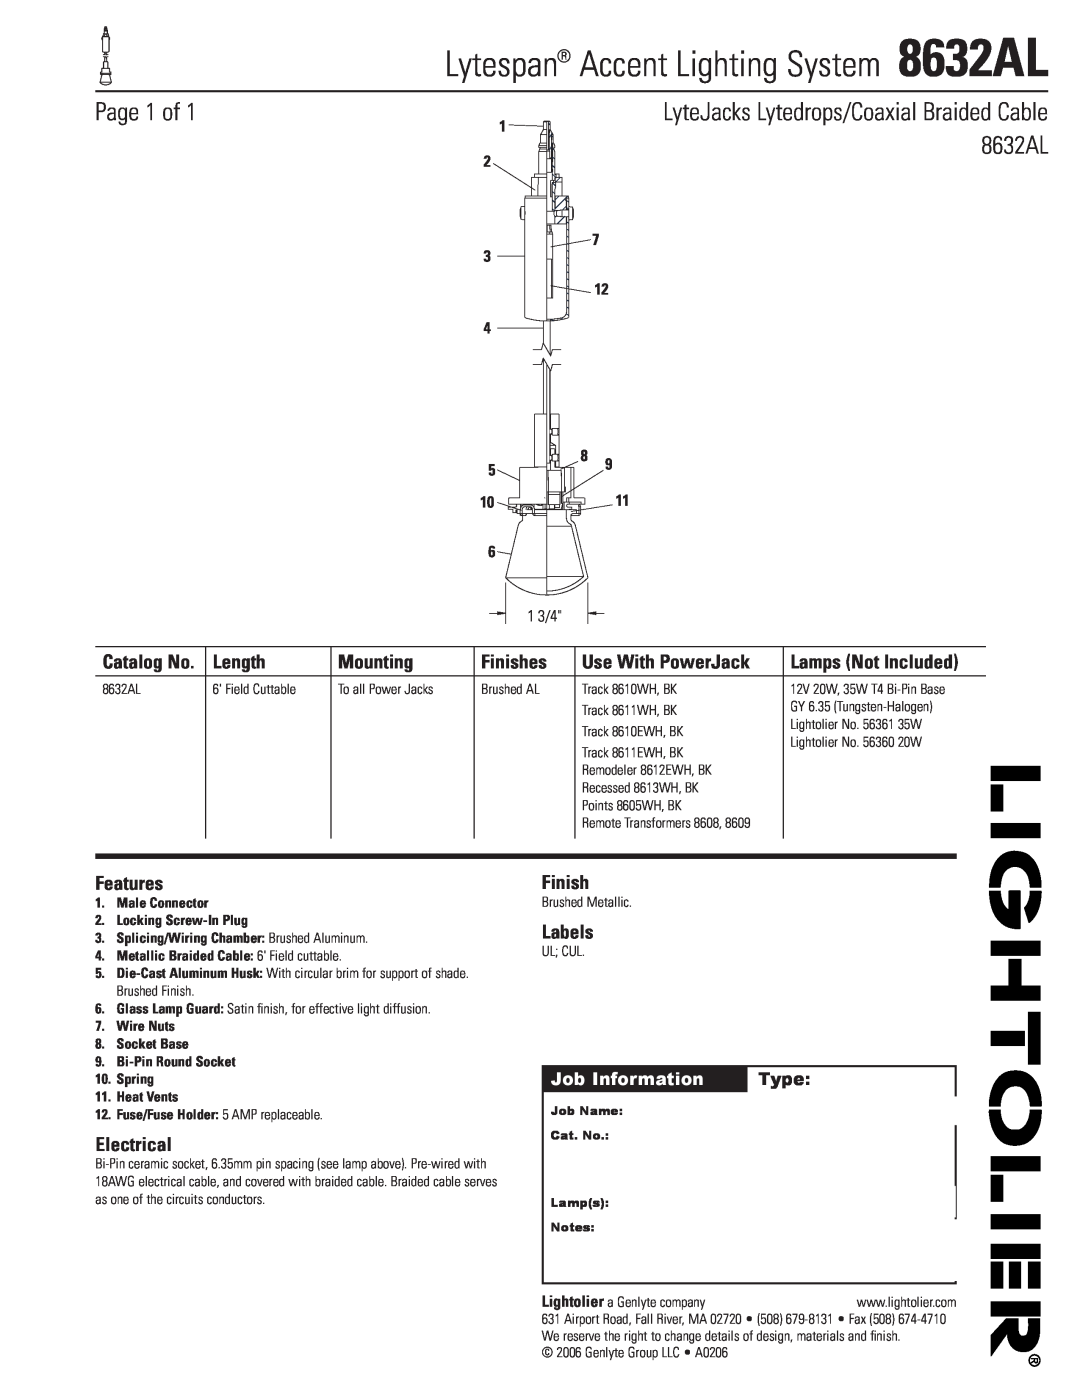 Lightolier manual Lytespan Accent Lighting System 8632AL, Page 1 of, LyteJacks Lytedrops/Coaxial Braided Cable 8632AL 